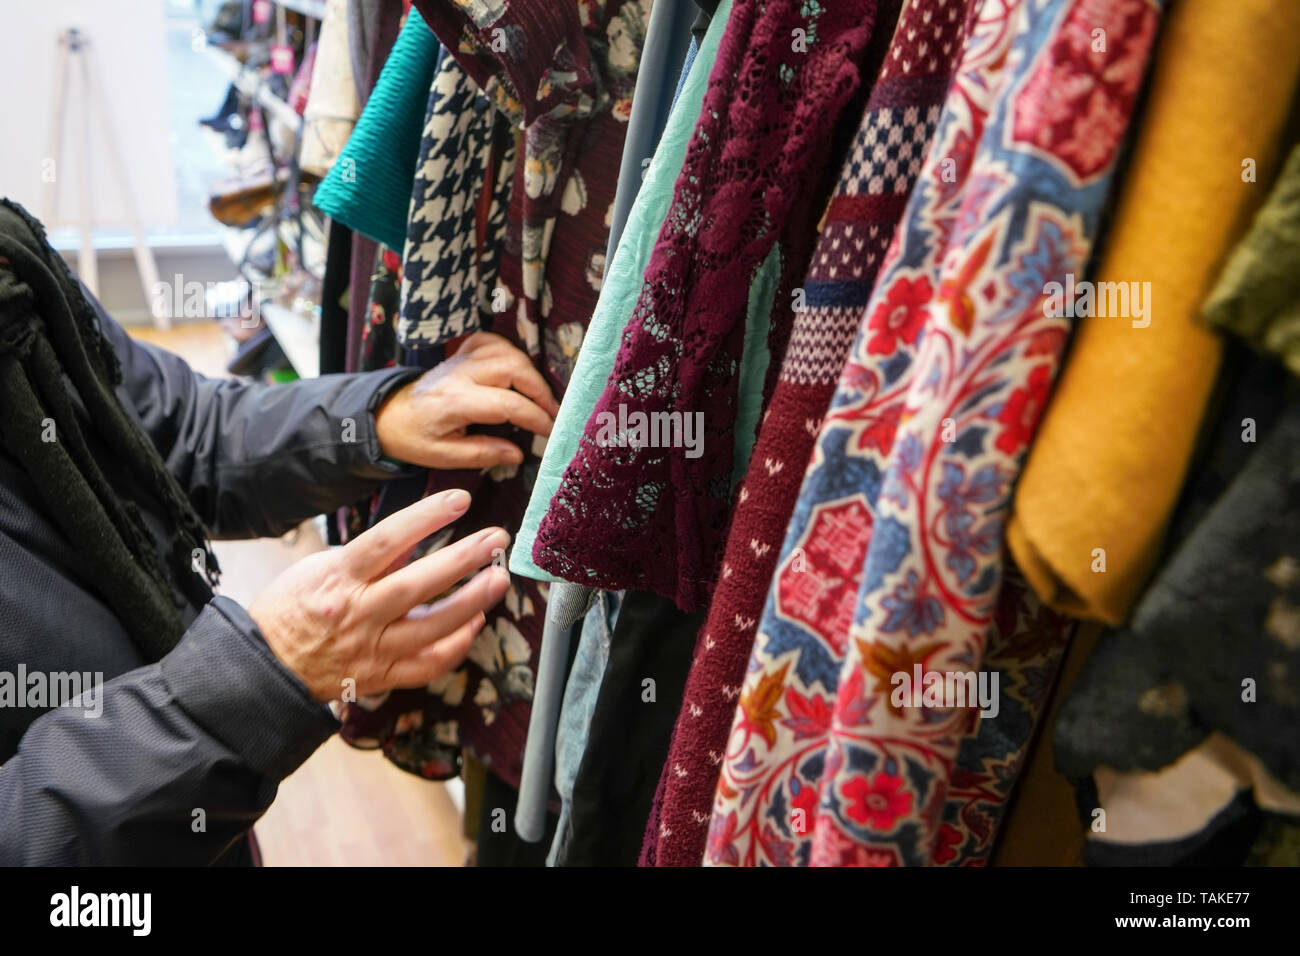 Senior woman going through clothes in second hand thrift charity shop, detail on her moving hands. Stock Photo